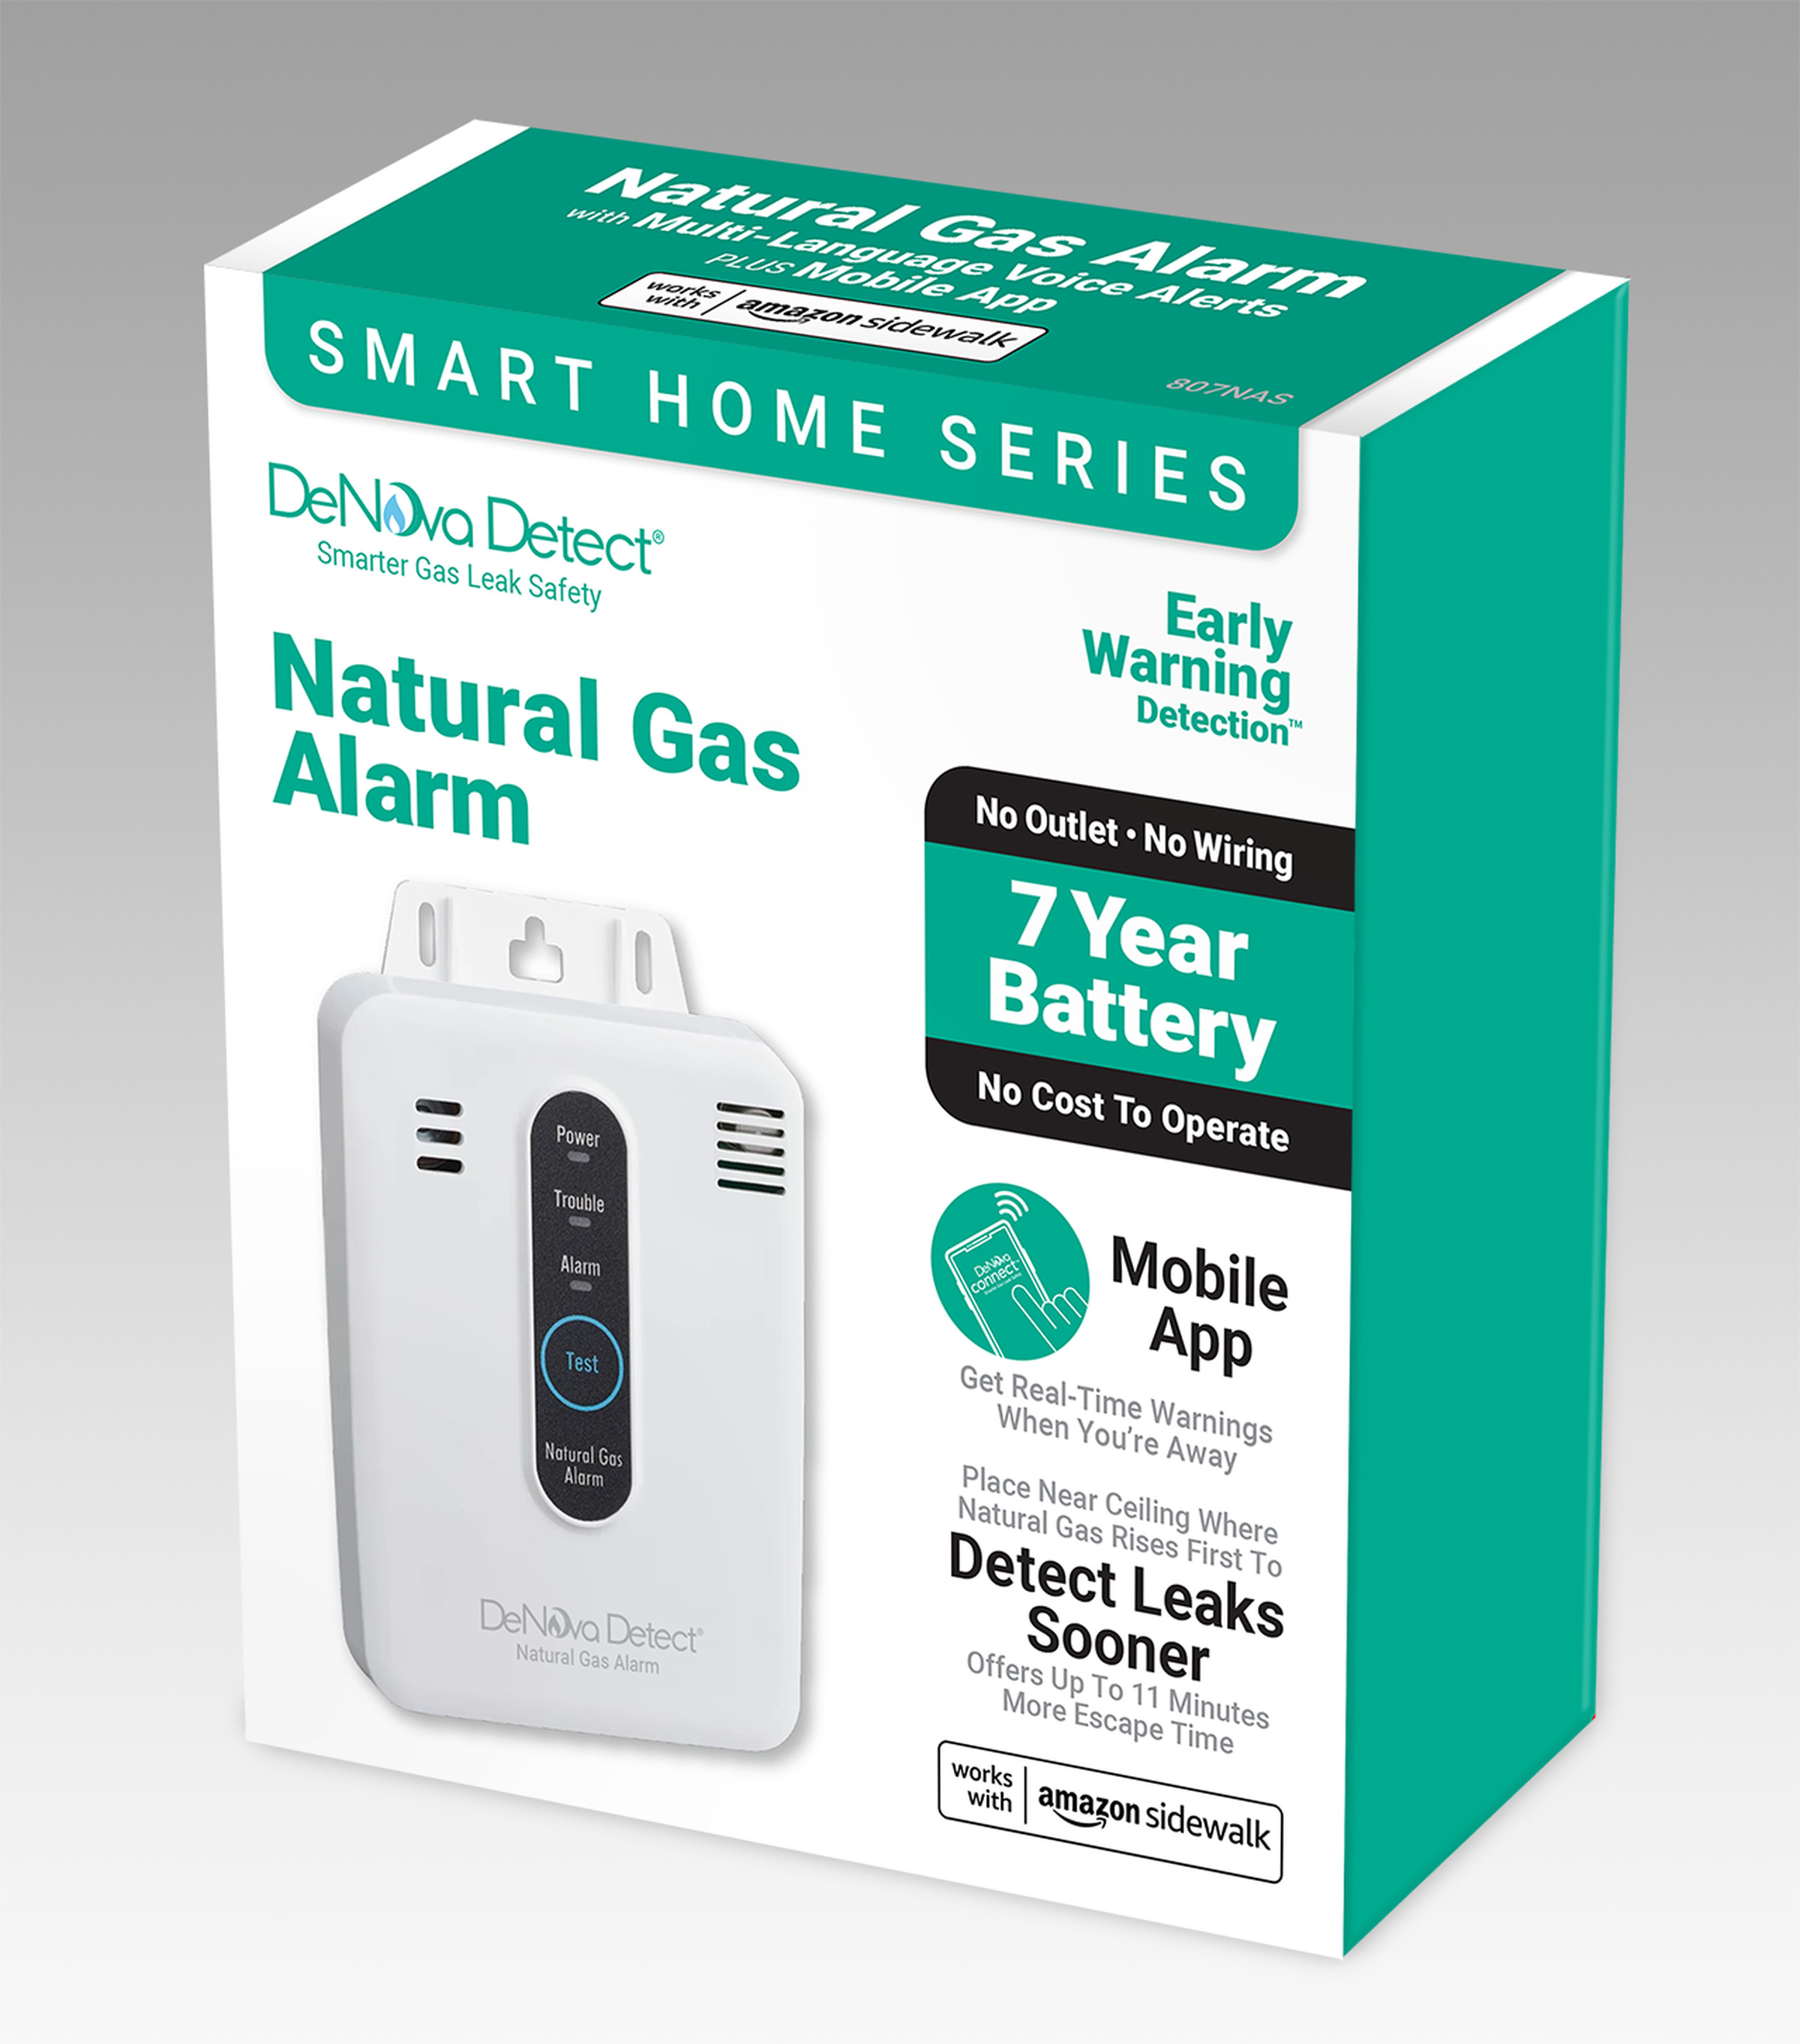 The DeNova Detect is a wireless natural gas alarm that works over Sidewalk.